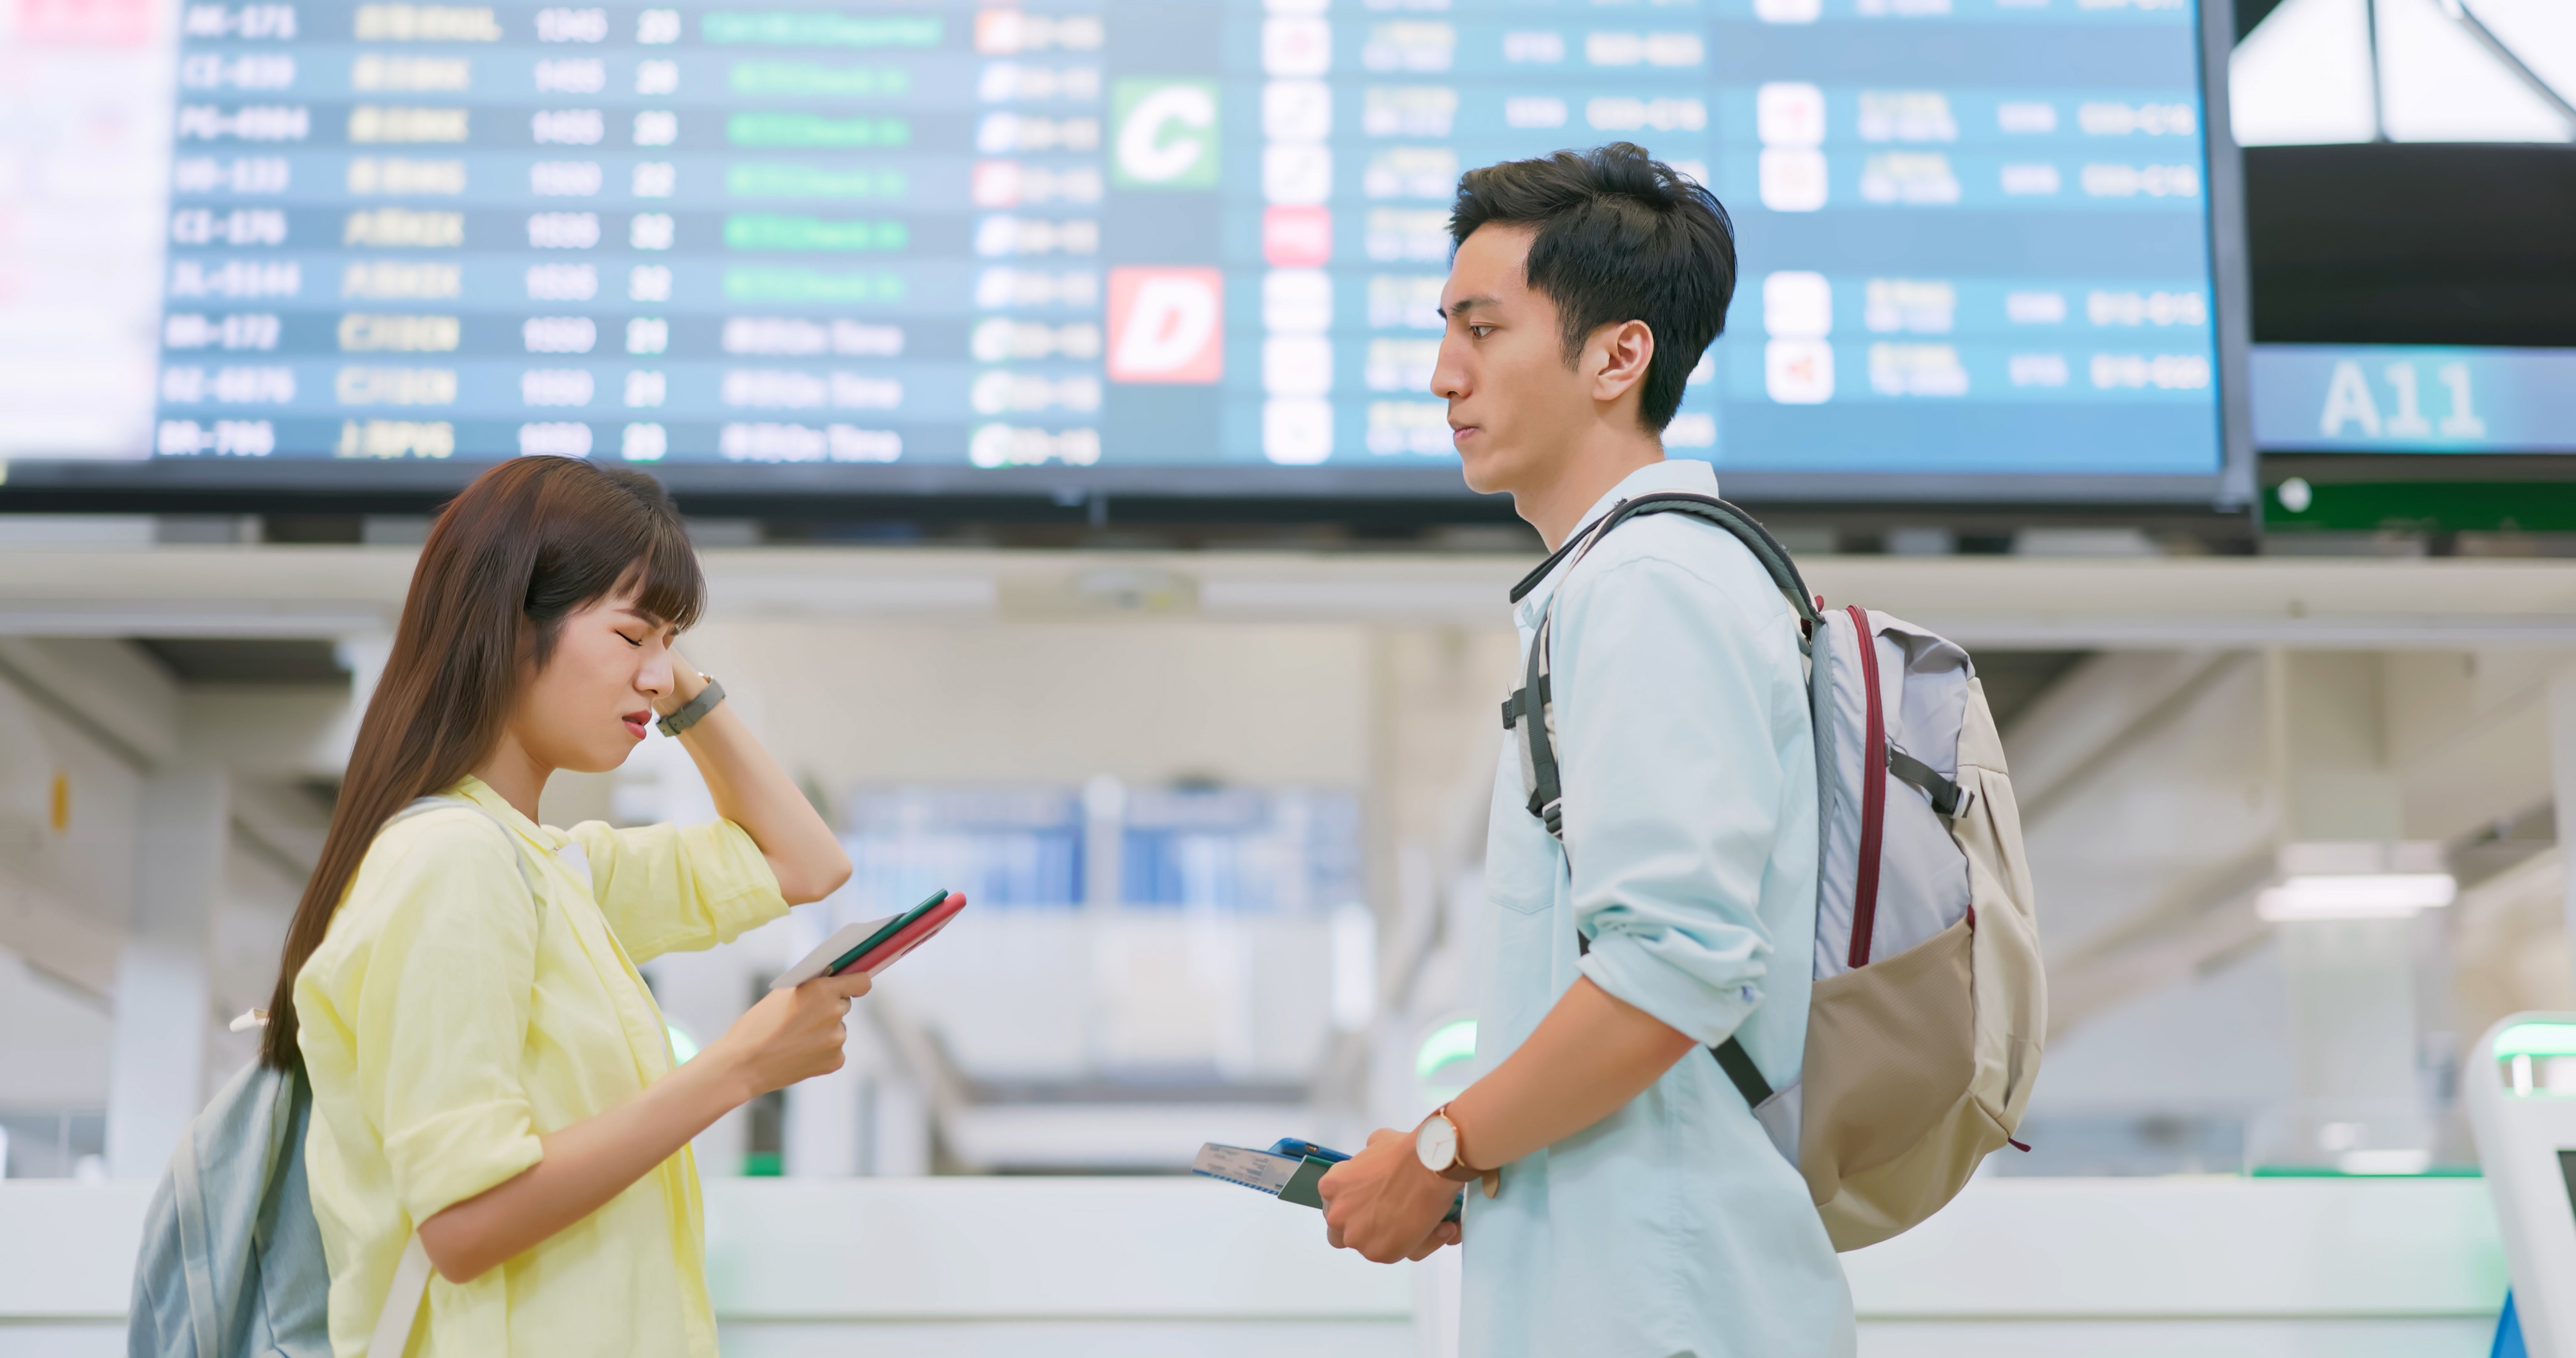 Two people standing in an airport terminal, looking at phone and tickets, with flight information board in the background